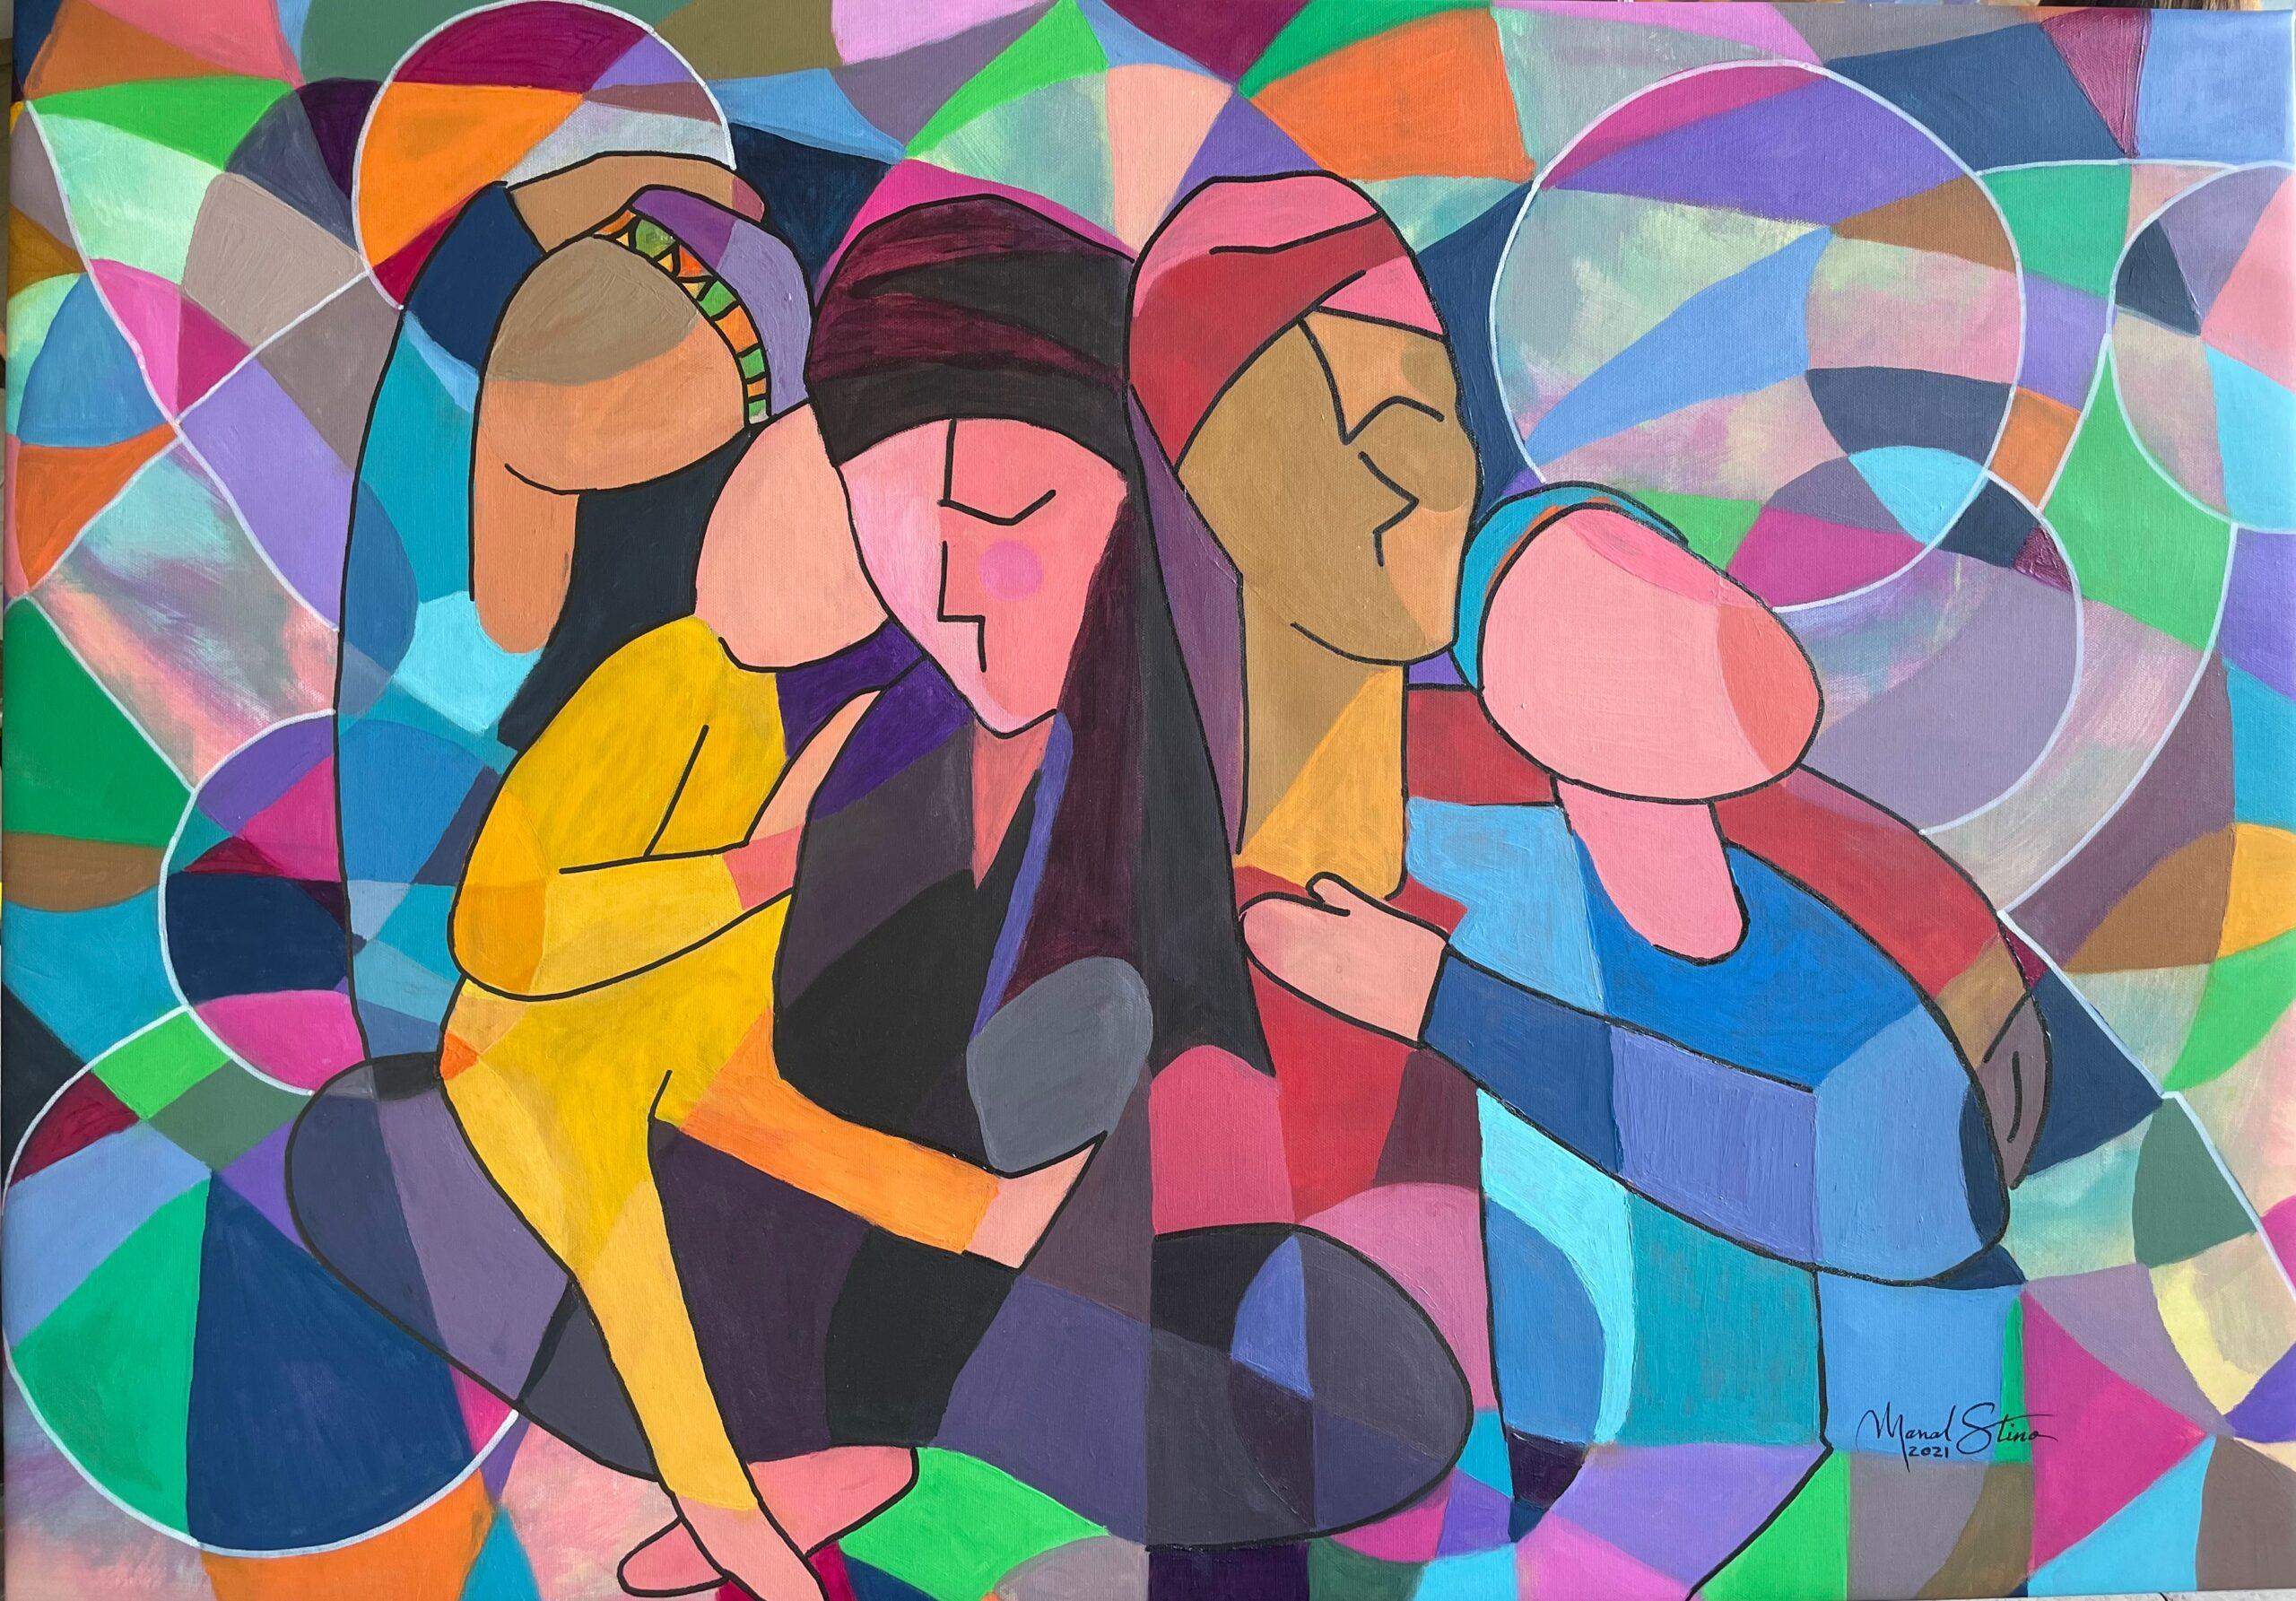 La Familia by Manal Stino - Painting by Unknown